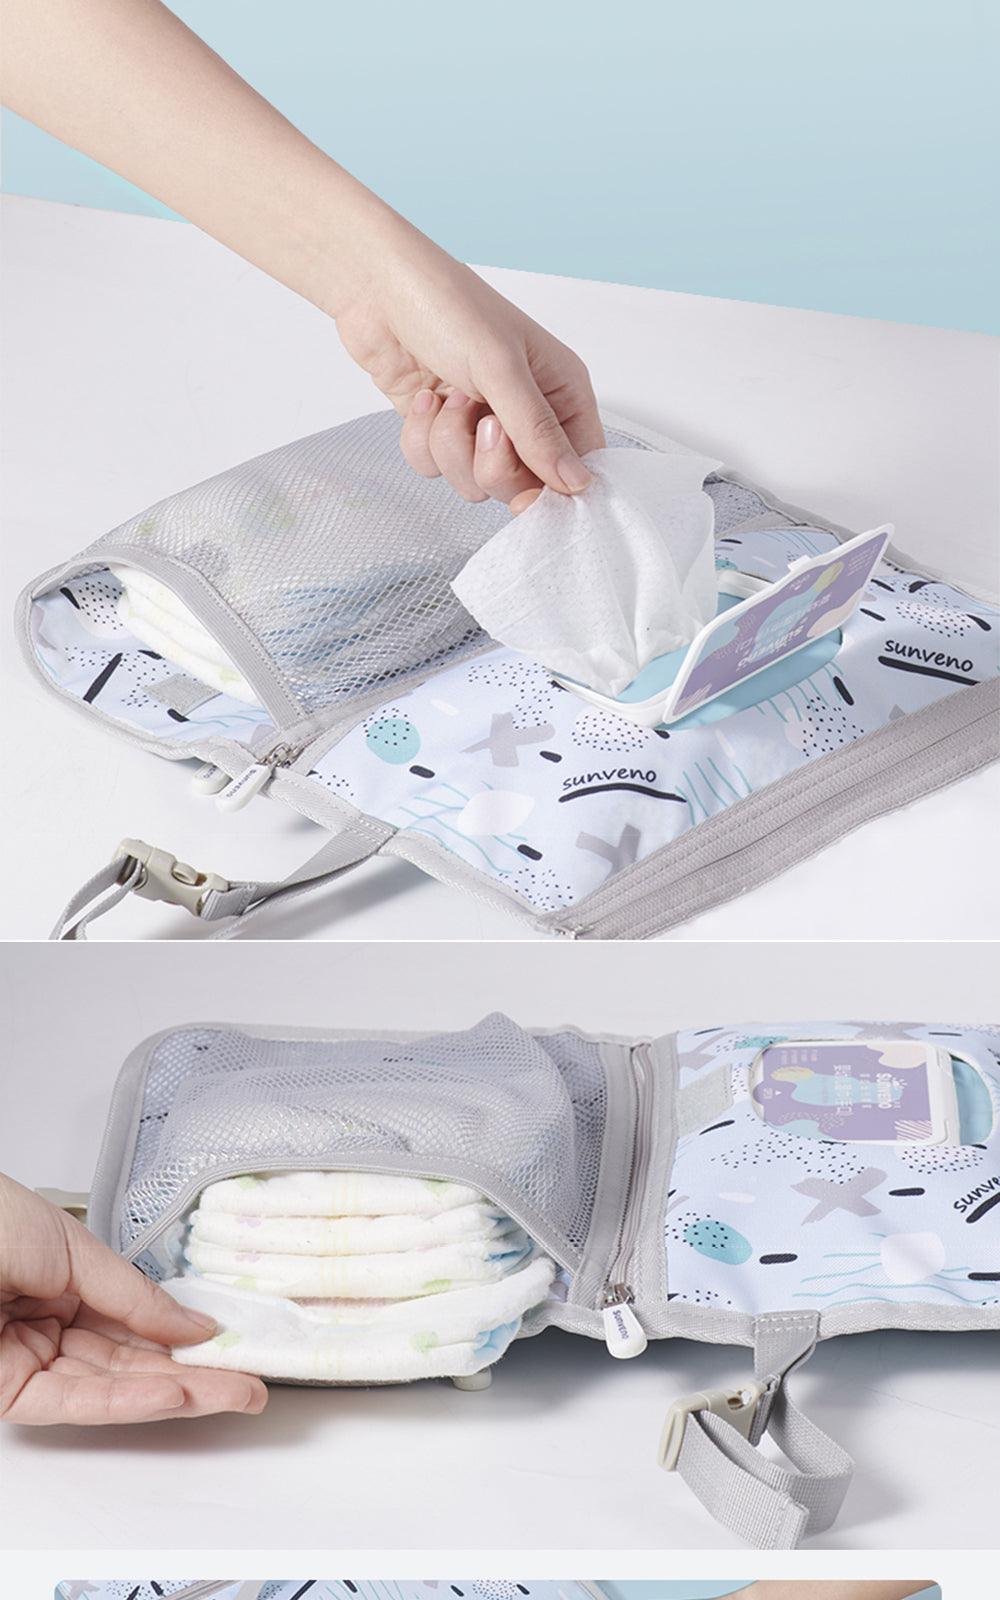 Amazing Baby Changing Mat - Portable Foldable Washable Waterproof Mattress Changing Pad - Reusable Travel Pad Diaper (X1)